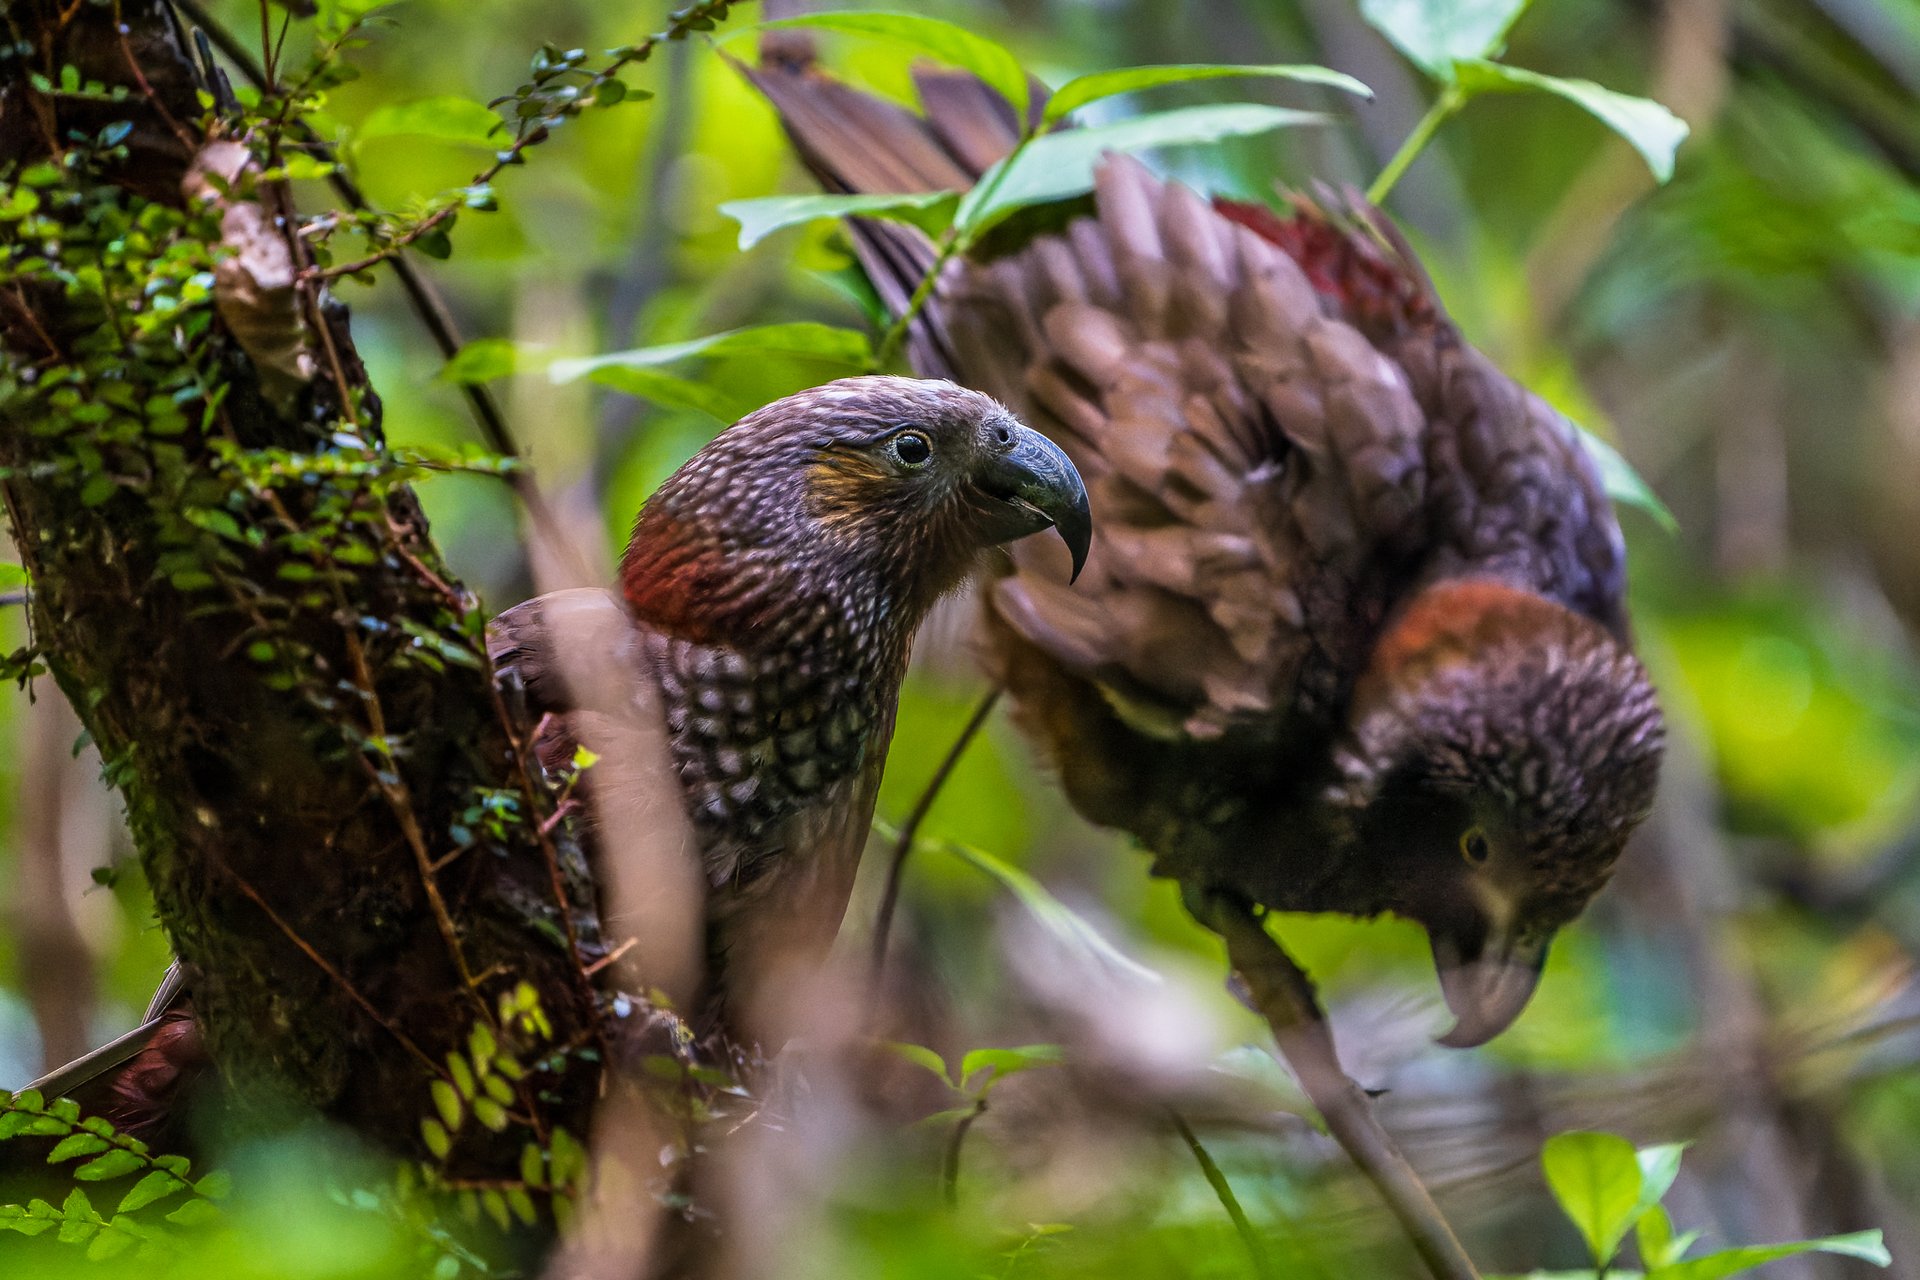 10-Day Northern Trail Tour from Auckland to Wellington: An Unmissable Māori Cultural Experience and Hāngi | Rare Bird Species at Zealandia | Hobbiton Movie Set | 